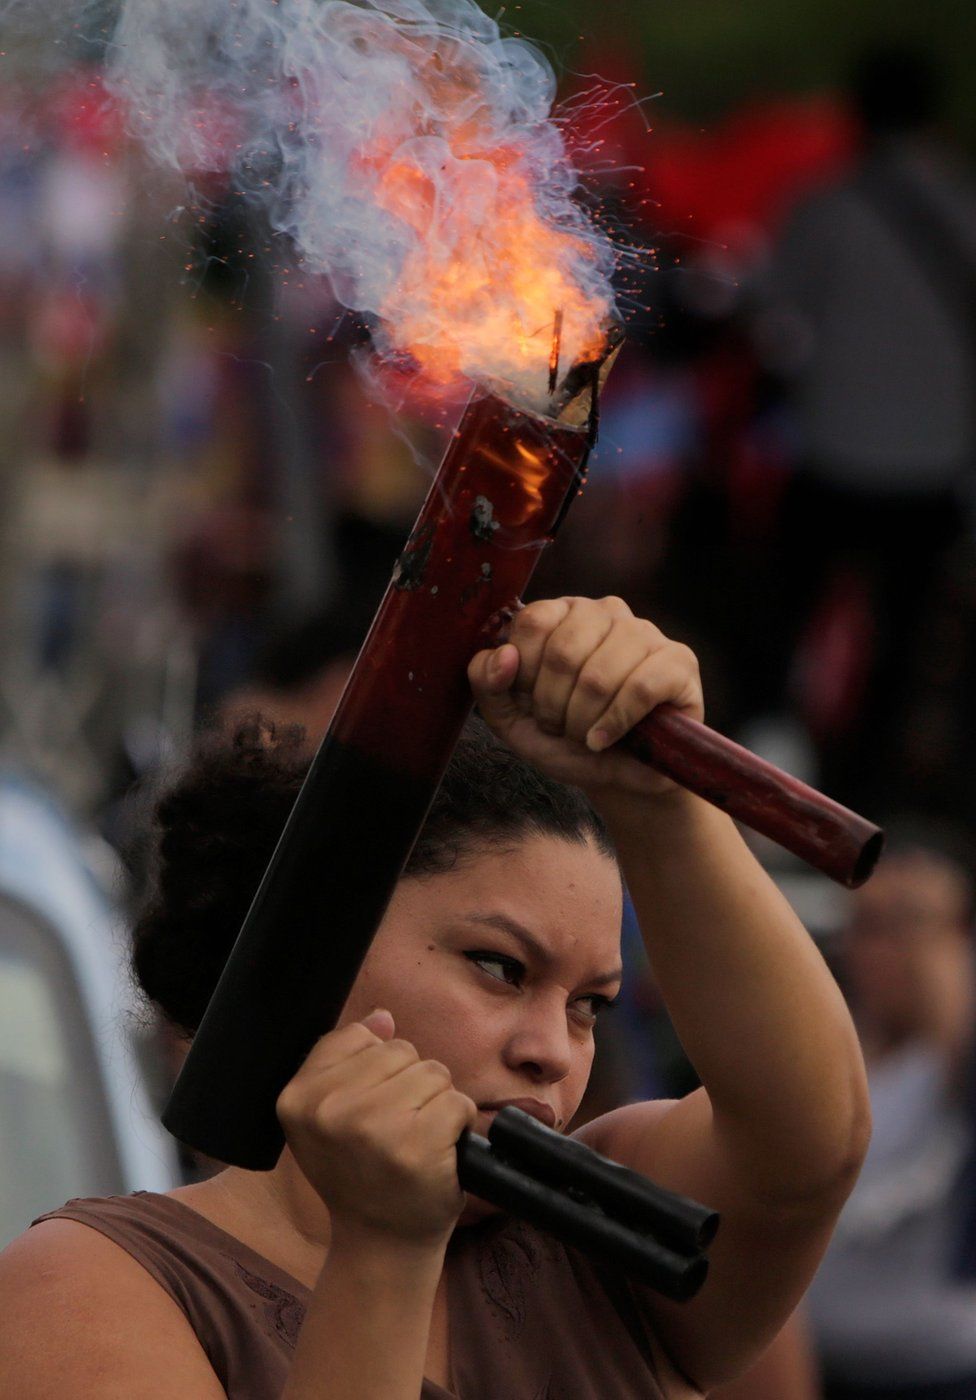 A woman fires a home-made mortar vertically into the air during a pro-government rally